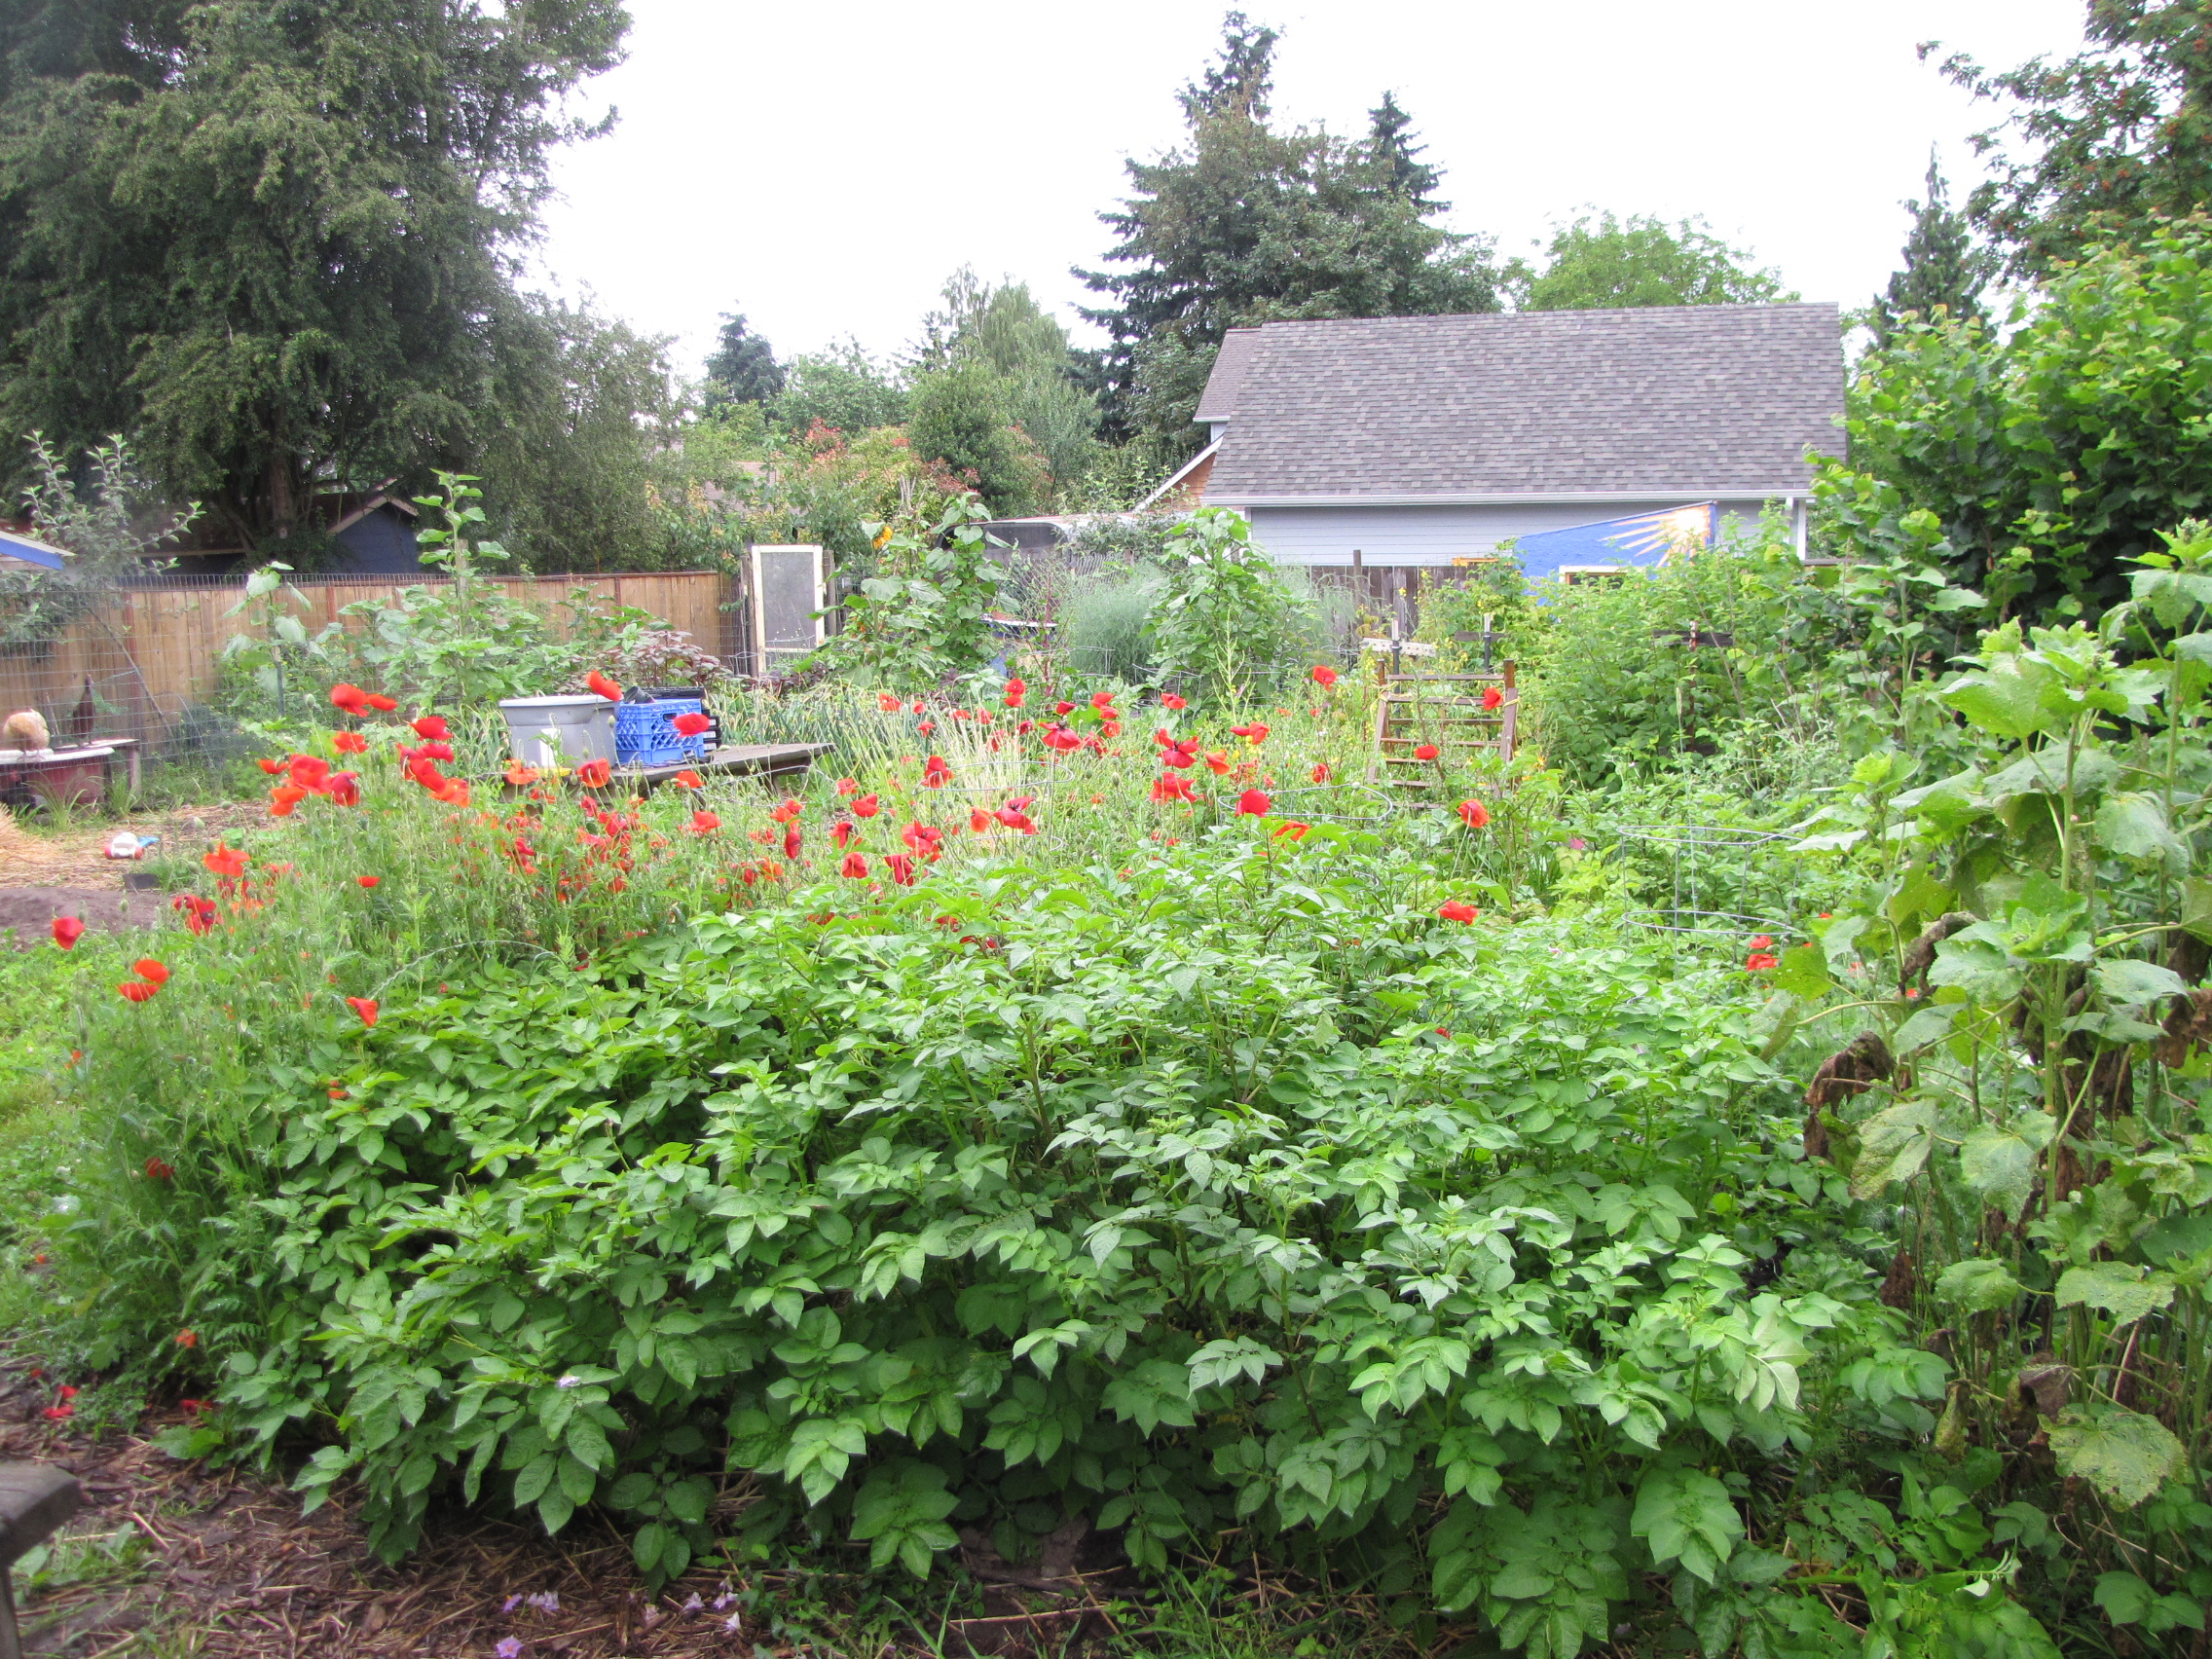 Potatoes, poppies, hollyhocks, kale, cucumber, chard, pumpkins, tomatoes, white clover, currants, gladioulus, chard, filbert: a healthy and vigorous polculture, full of bees every morning